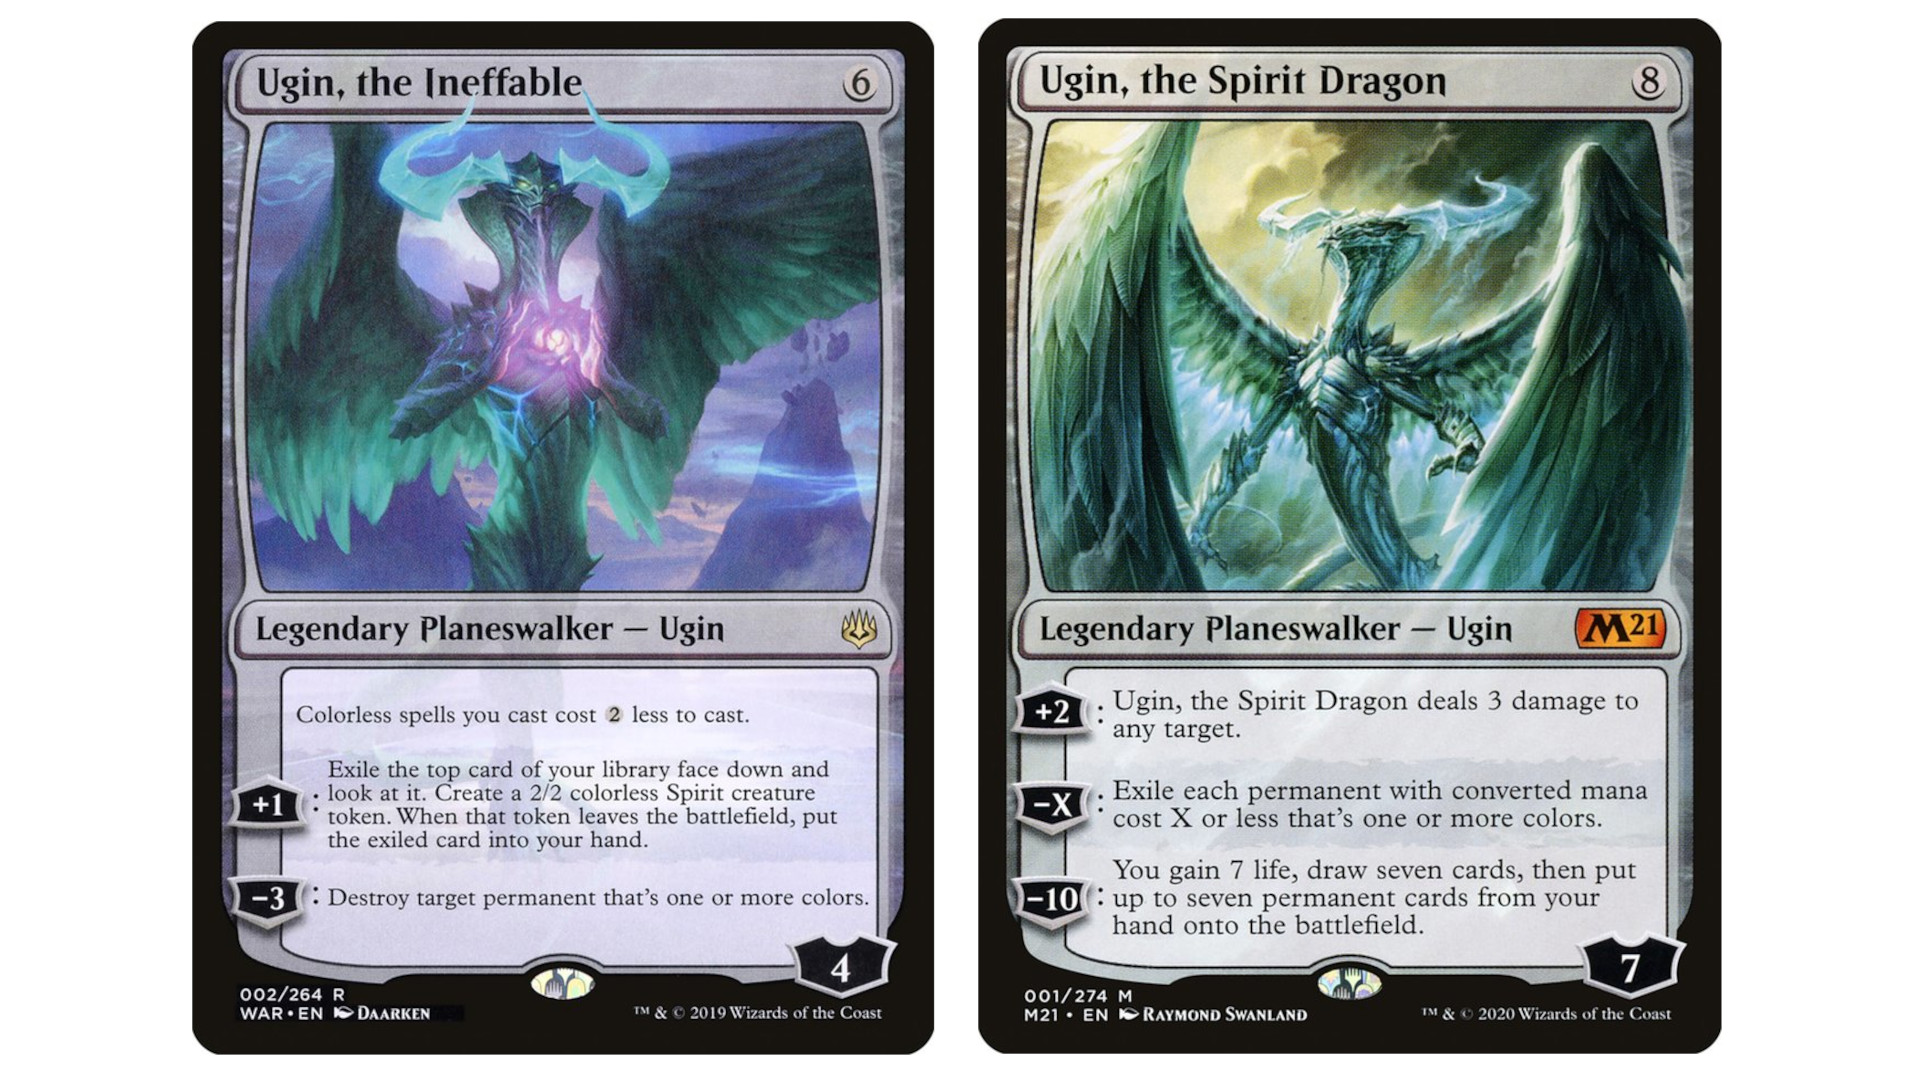 MTG Ugin the Spirit Dragon and Ugin the Ineffable cards from Wizards of the Coast